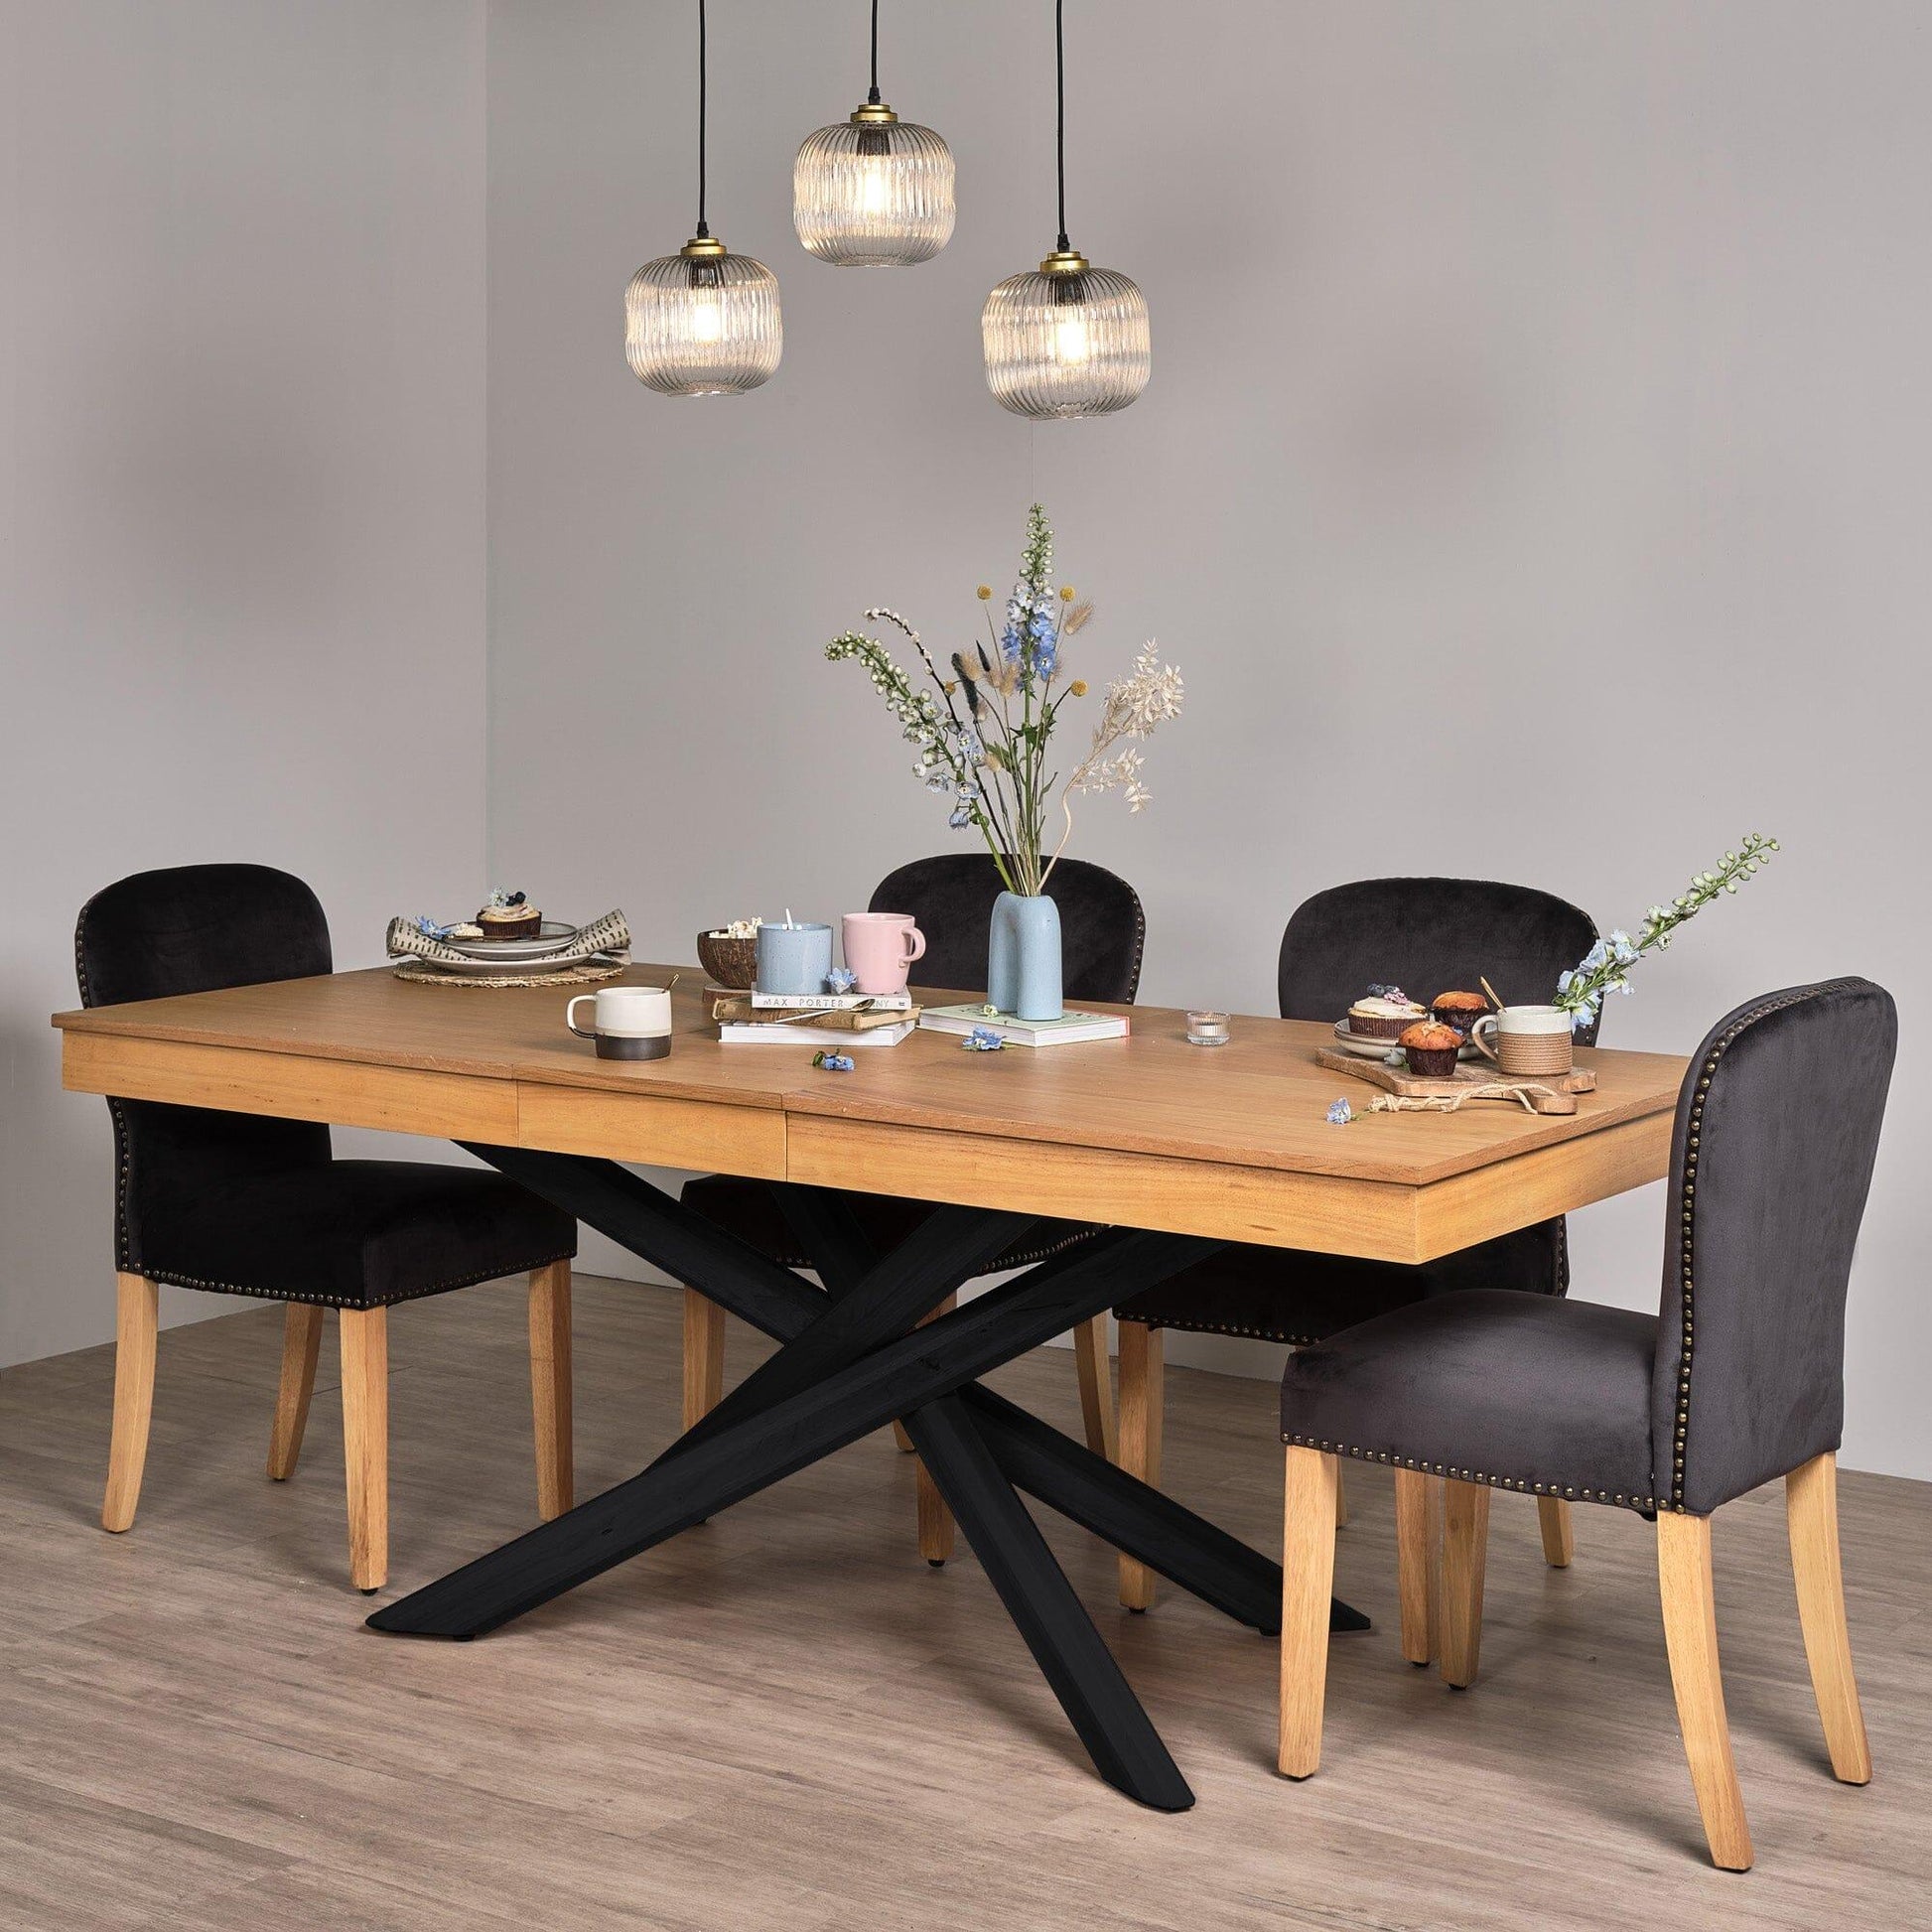 Amelia Oak Extendable Dining Table with Black Wood Legs